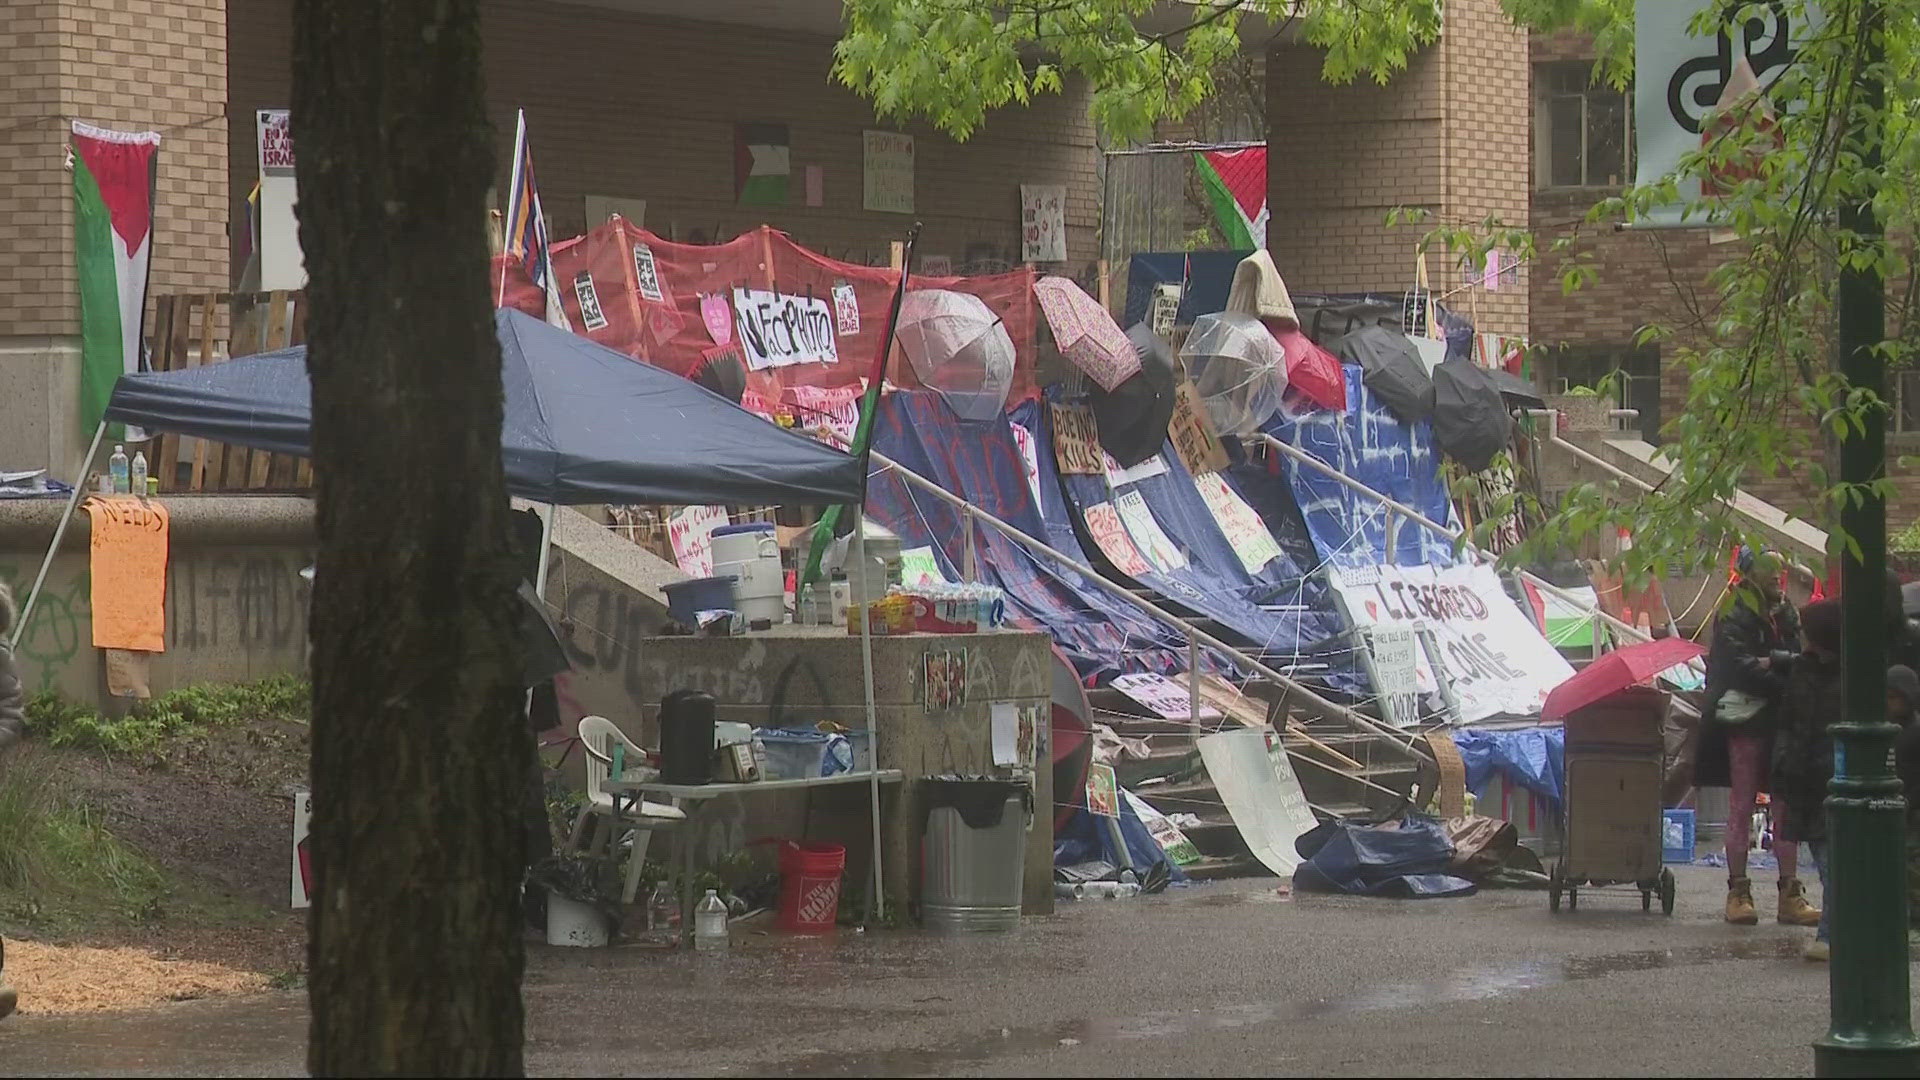 The Portland State University campus will remain closed on Wednesday as the protest continues.